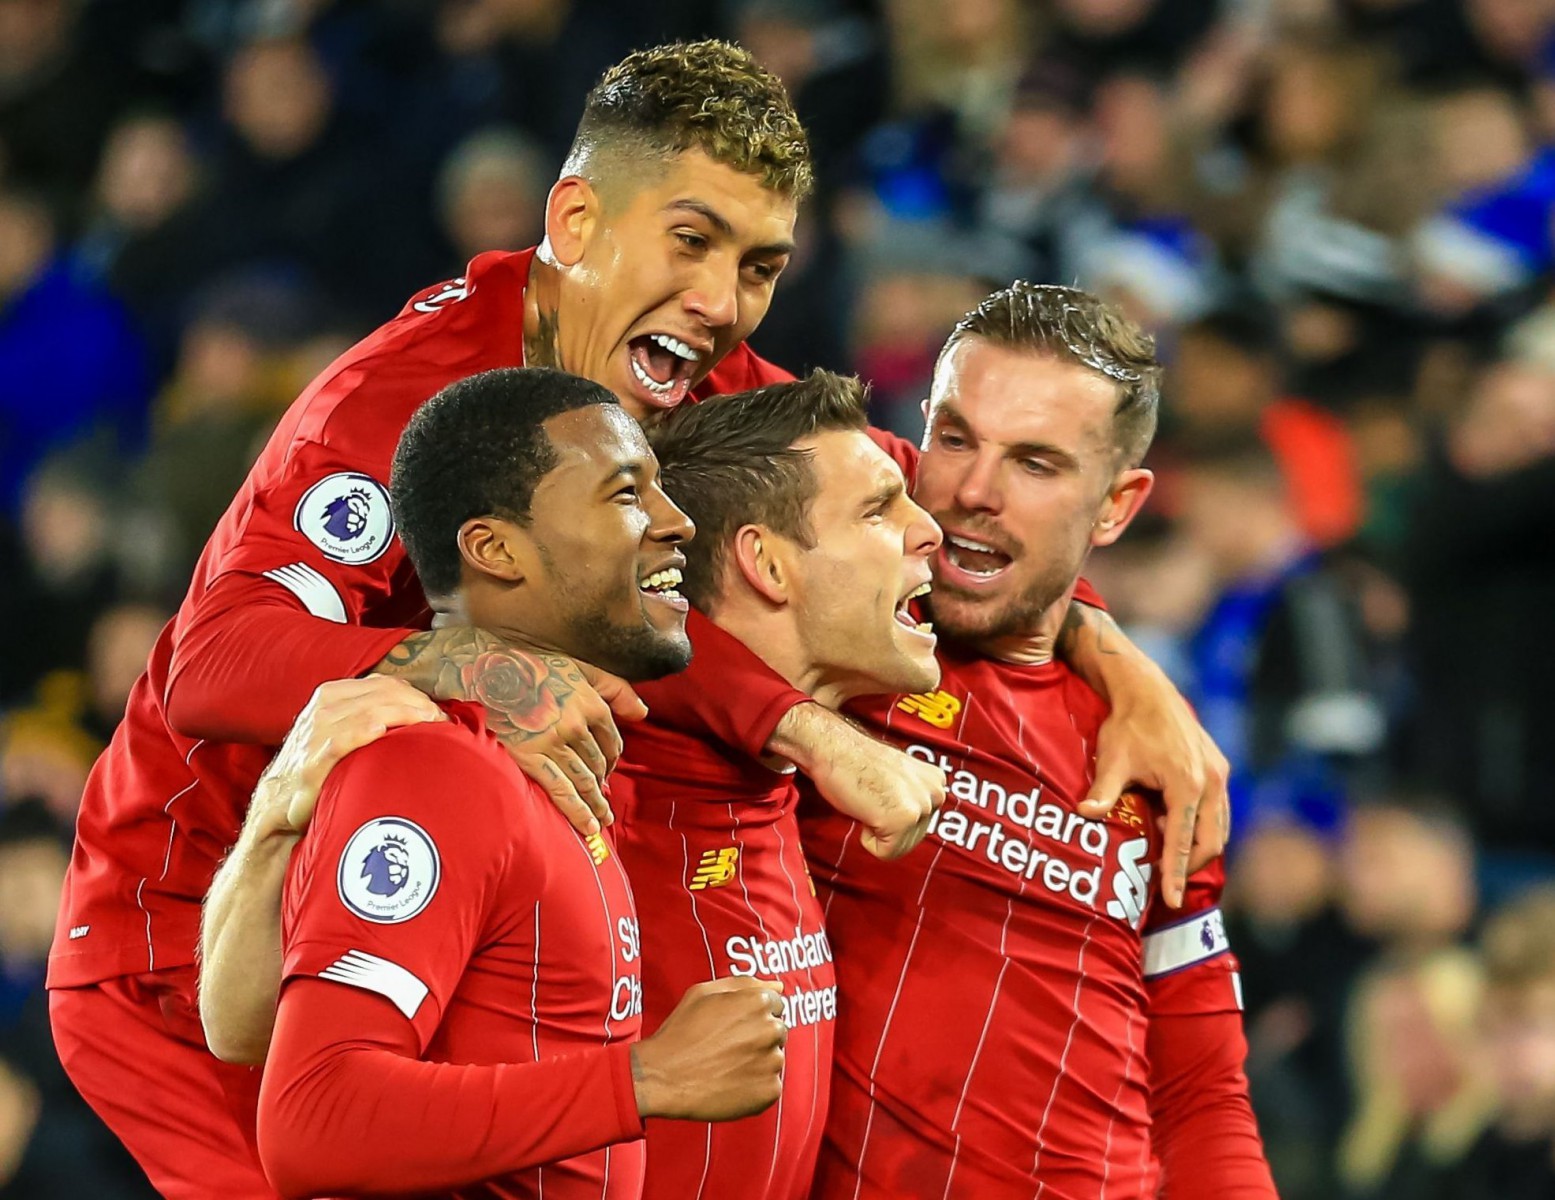 , Liverpool vs Sheffield United FREE: Live stream, TV channel, kick-off time and team news for Premier League fixture